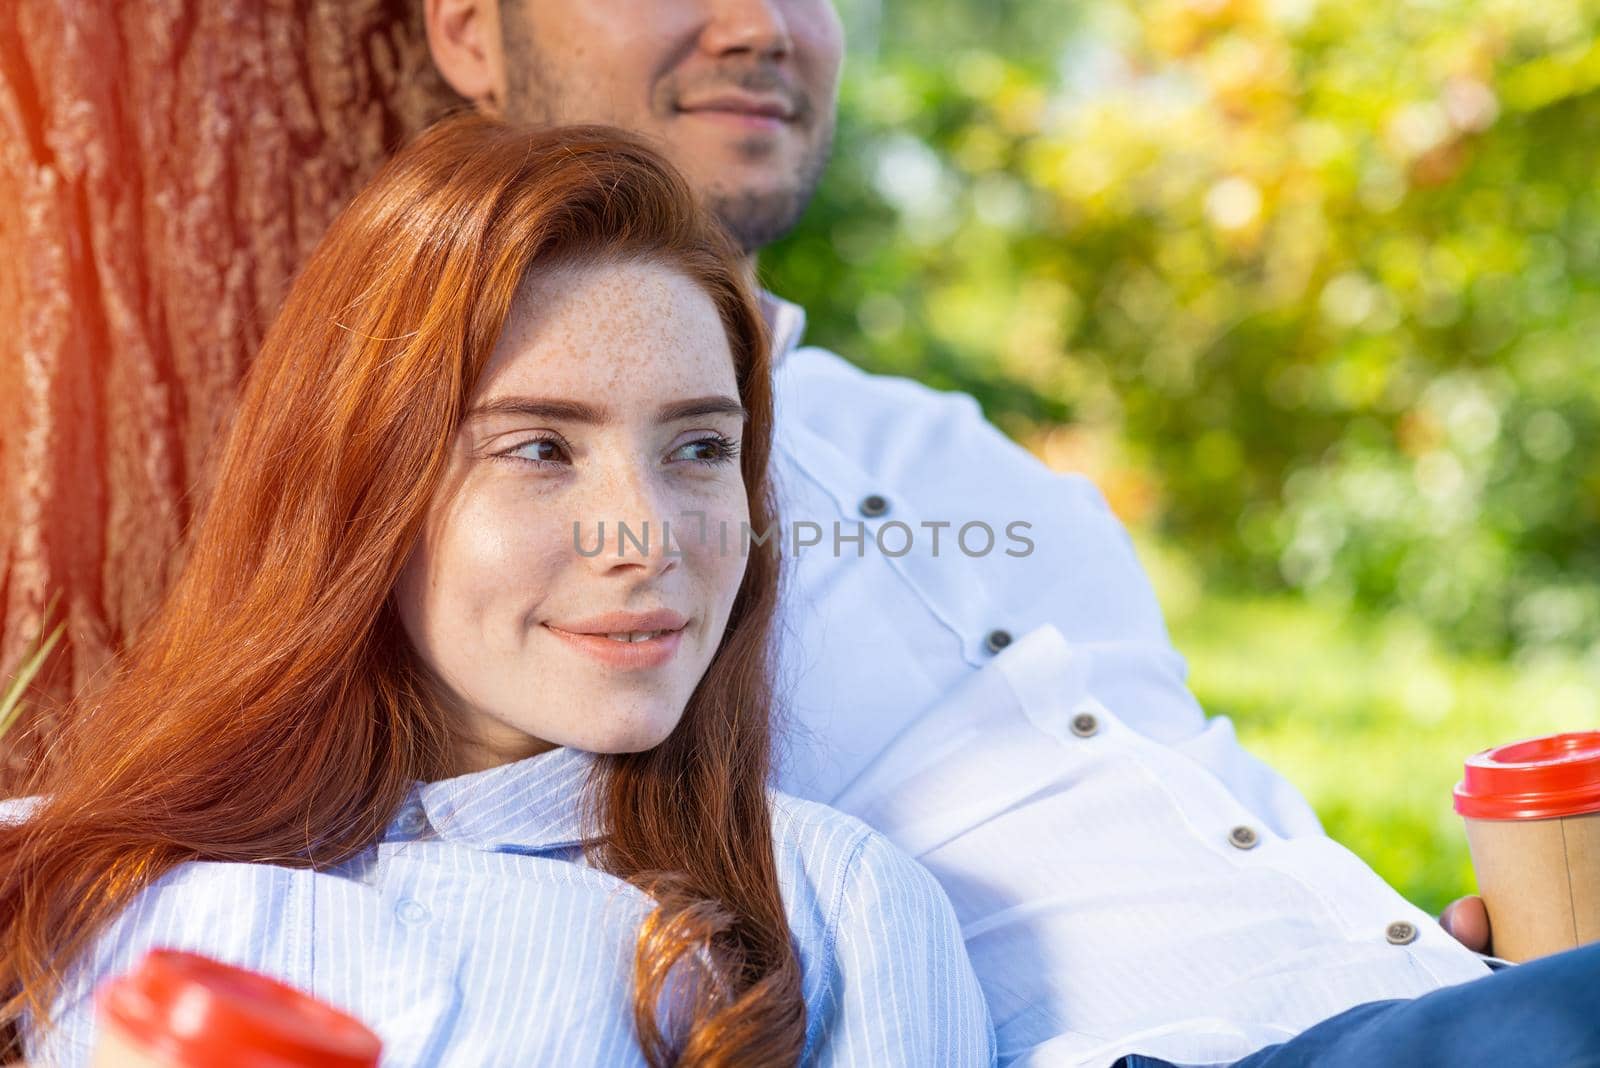 Young couple relaxing with coffee under tree in park on sunny day. Happy couple in love spend time outdoors together. Handsome man and pretty redhead girl sitting on green grass leaning against tree